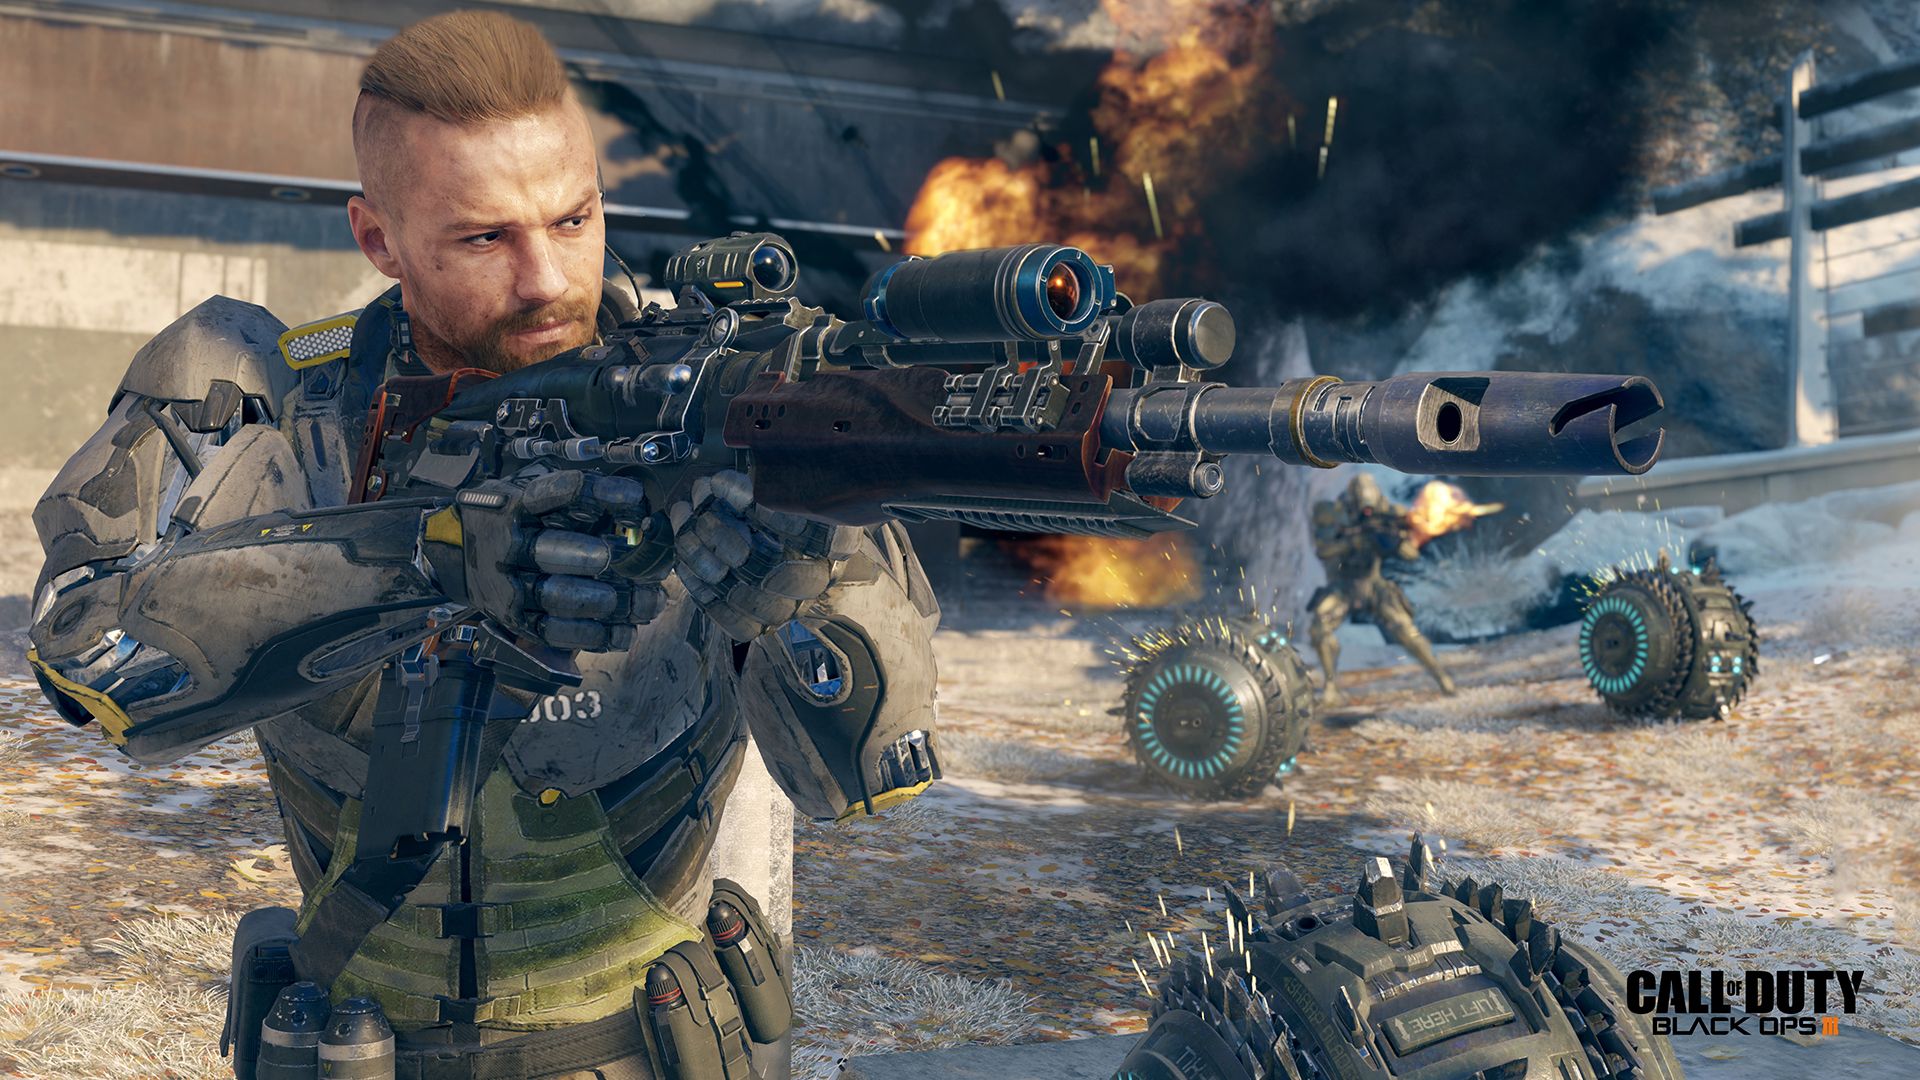 call of duty black ops 3 review image 1